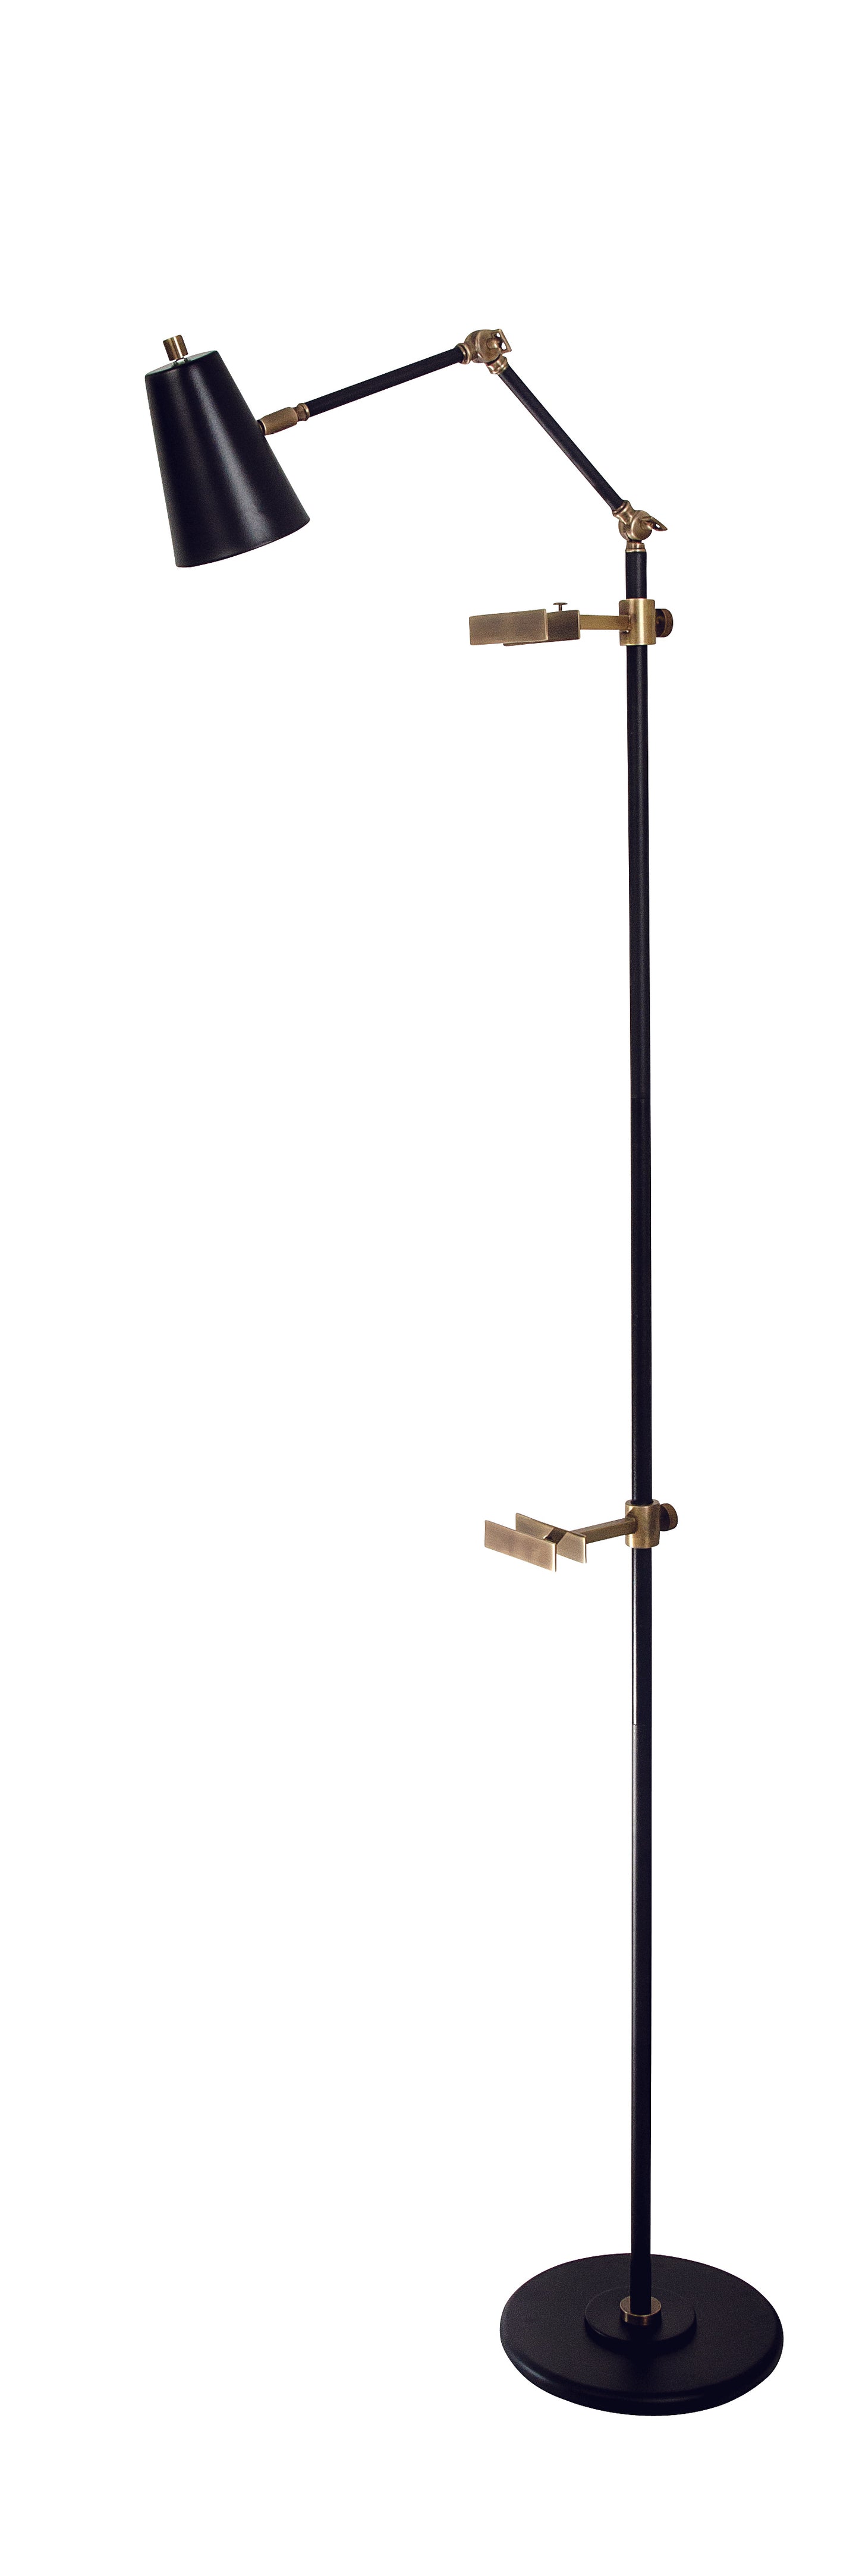 House of Troy River North Easel floor lamp black and antique brass accents spot light shade RN301-BLK/AB